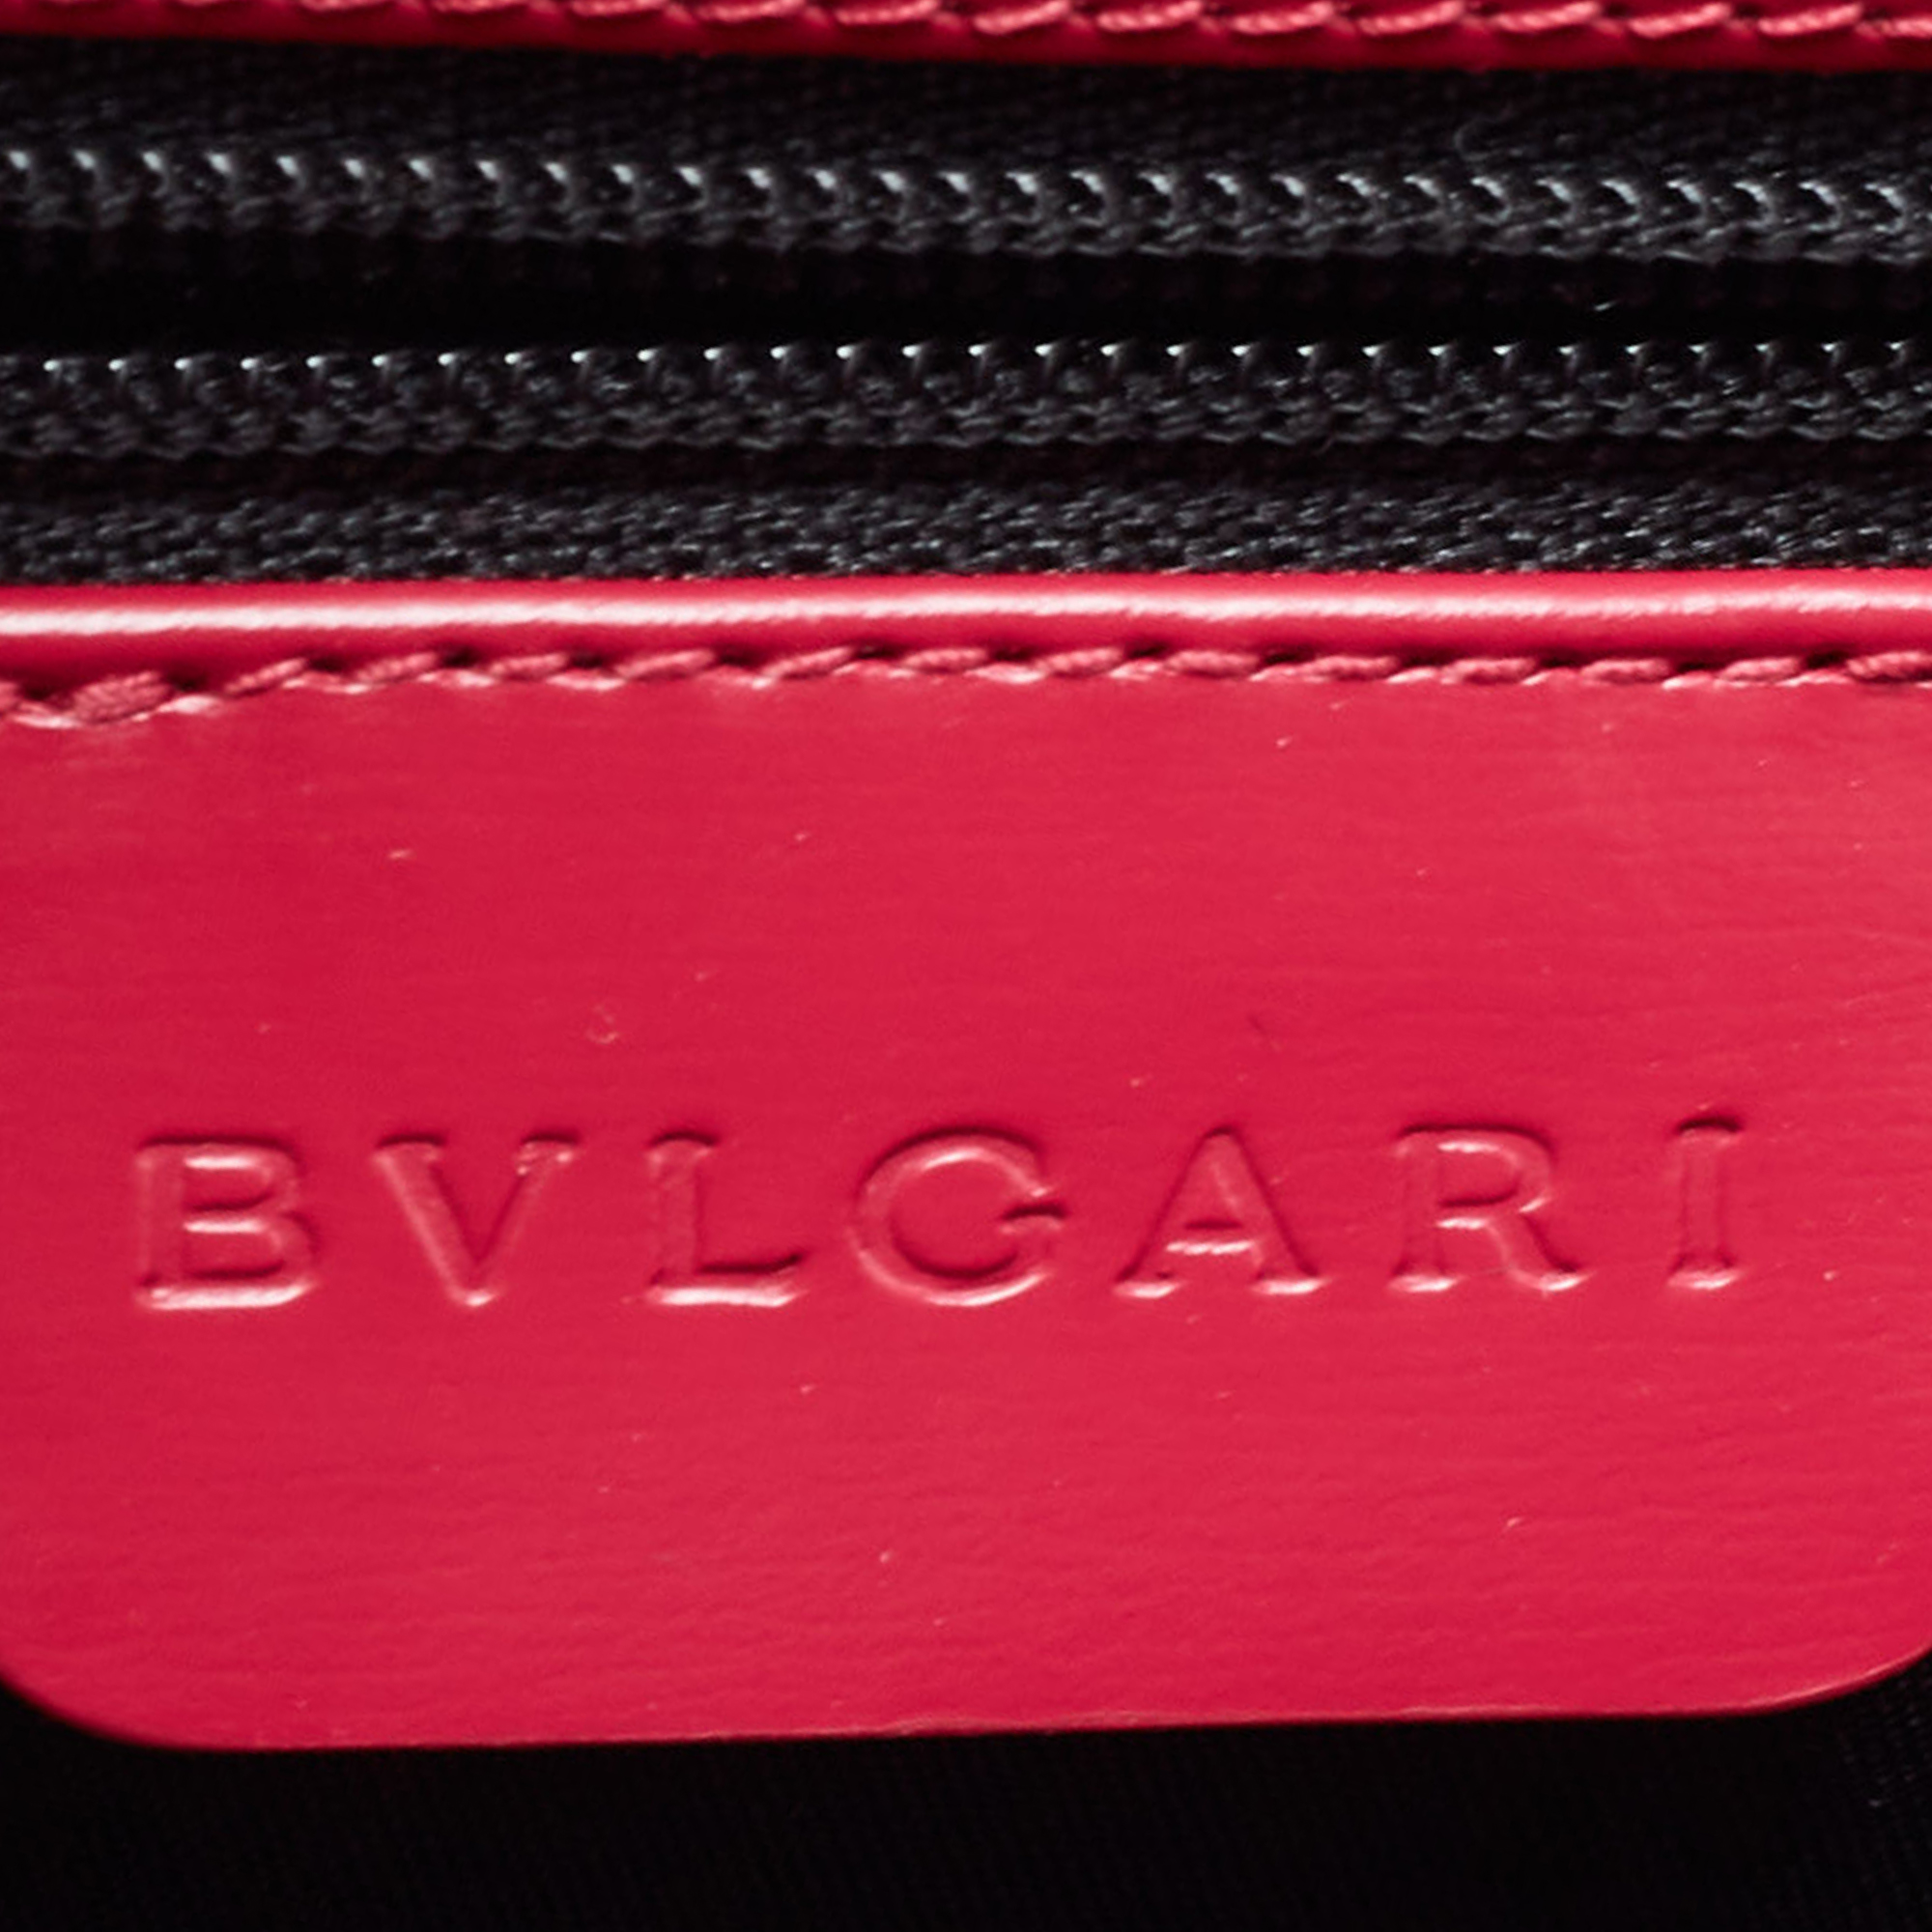 Bvlgari Burgundy/White Printed Fabric And Leather Flap Baguette Bag